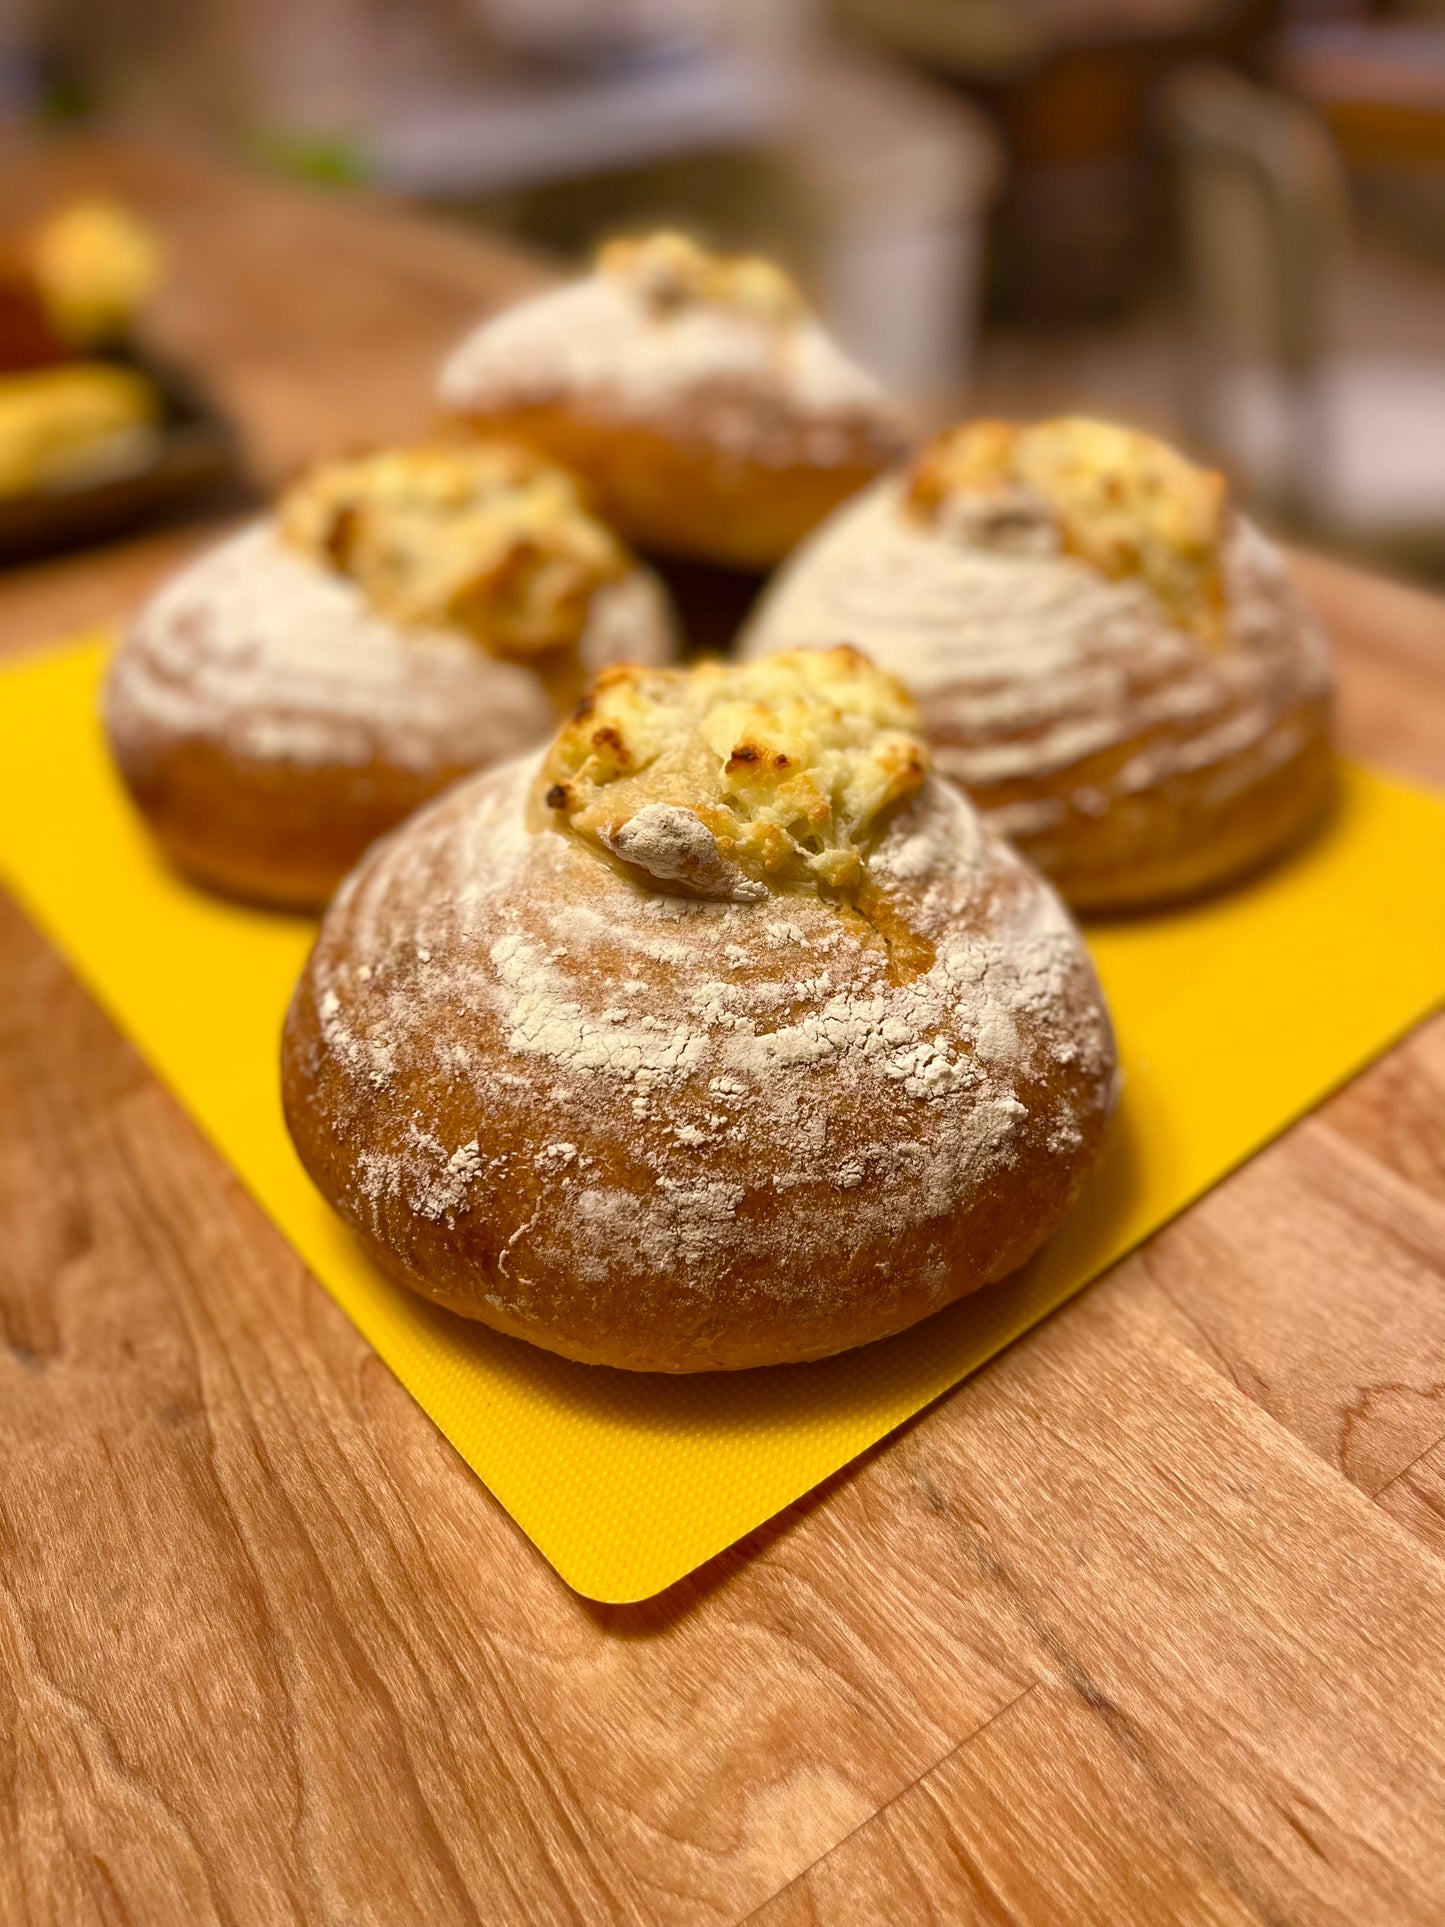 The Blessed Cheesemakers' Ricotta Blossom Bread